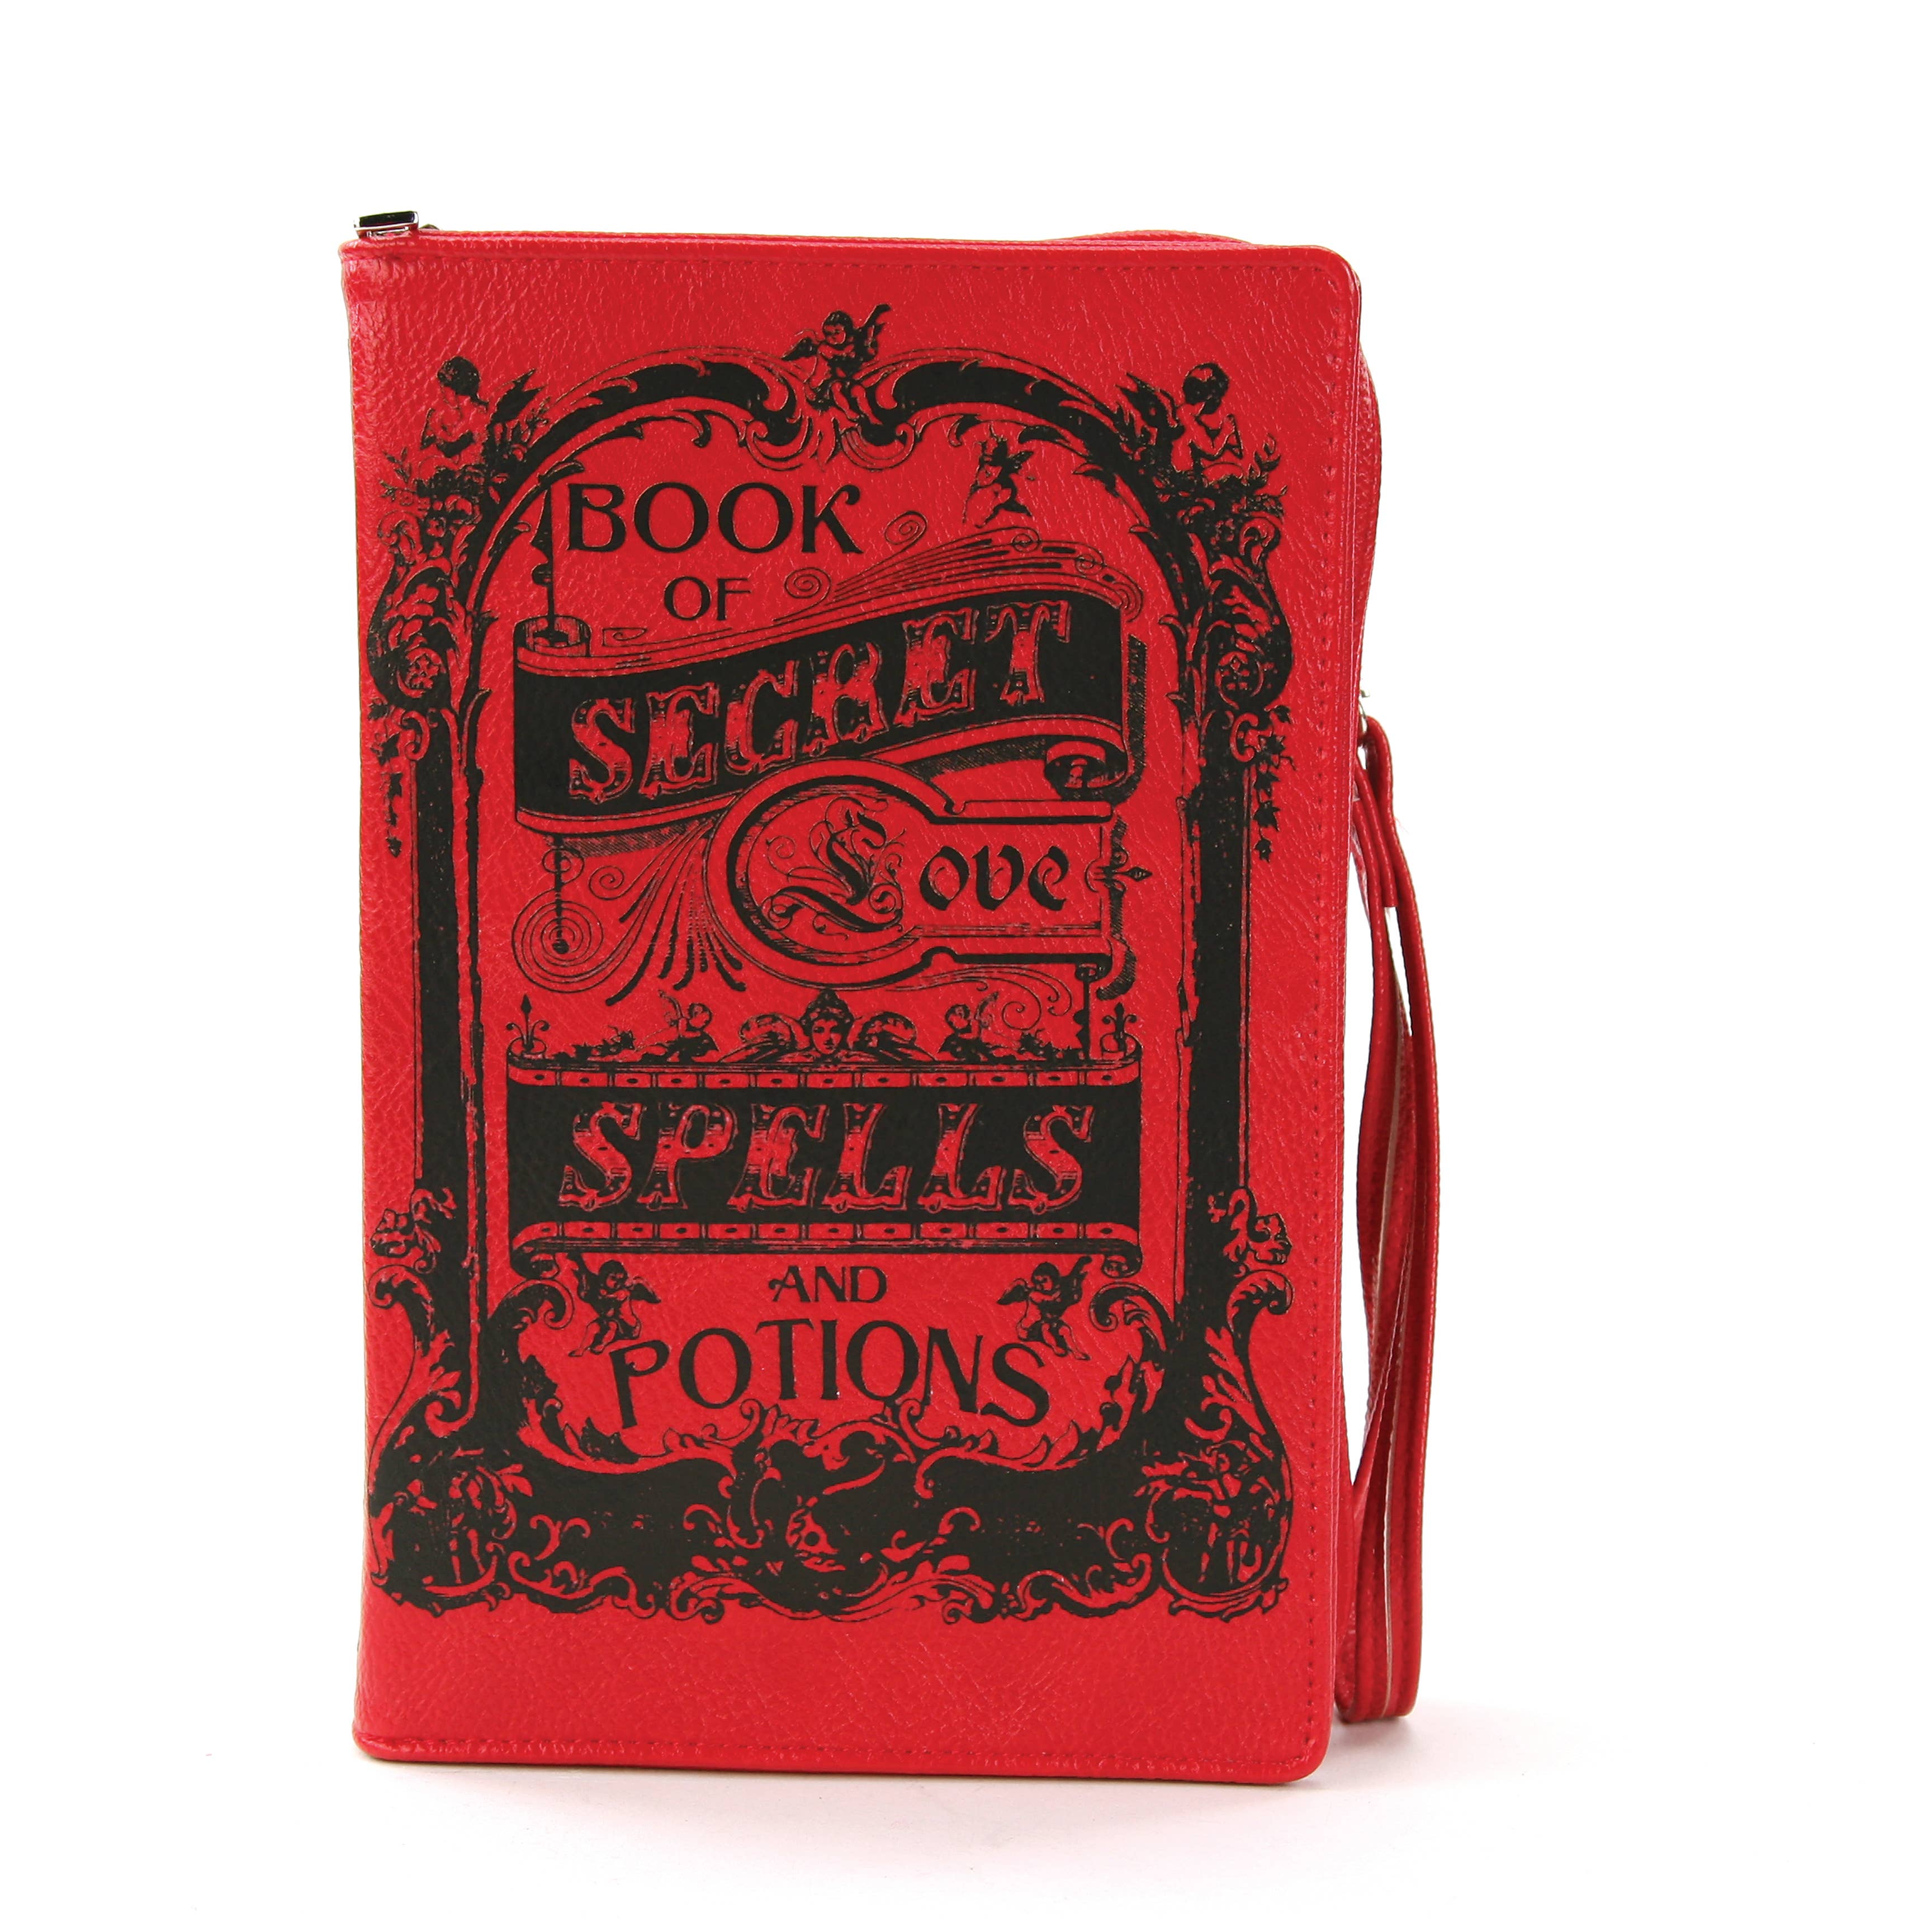 Gone with the Wind Book Clutch Bag in Vinyl – www.comecoinc.com